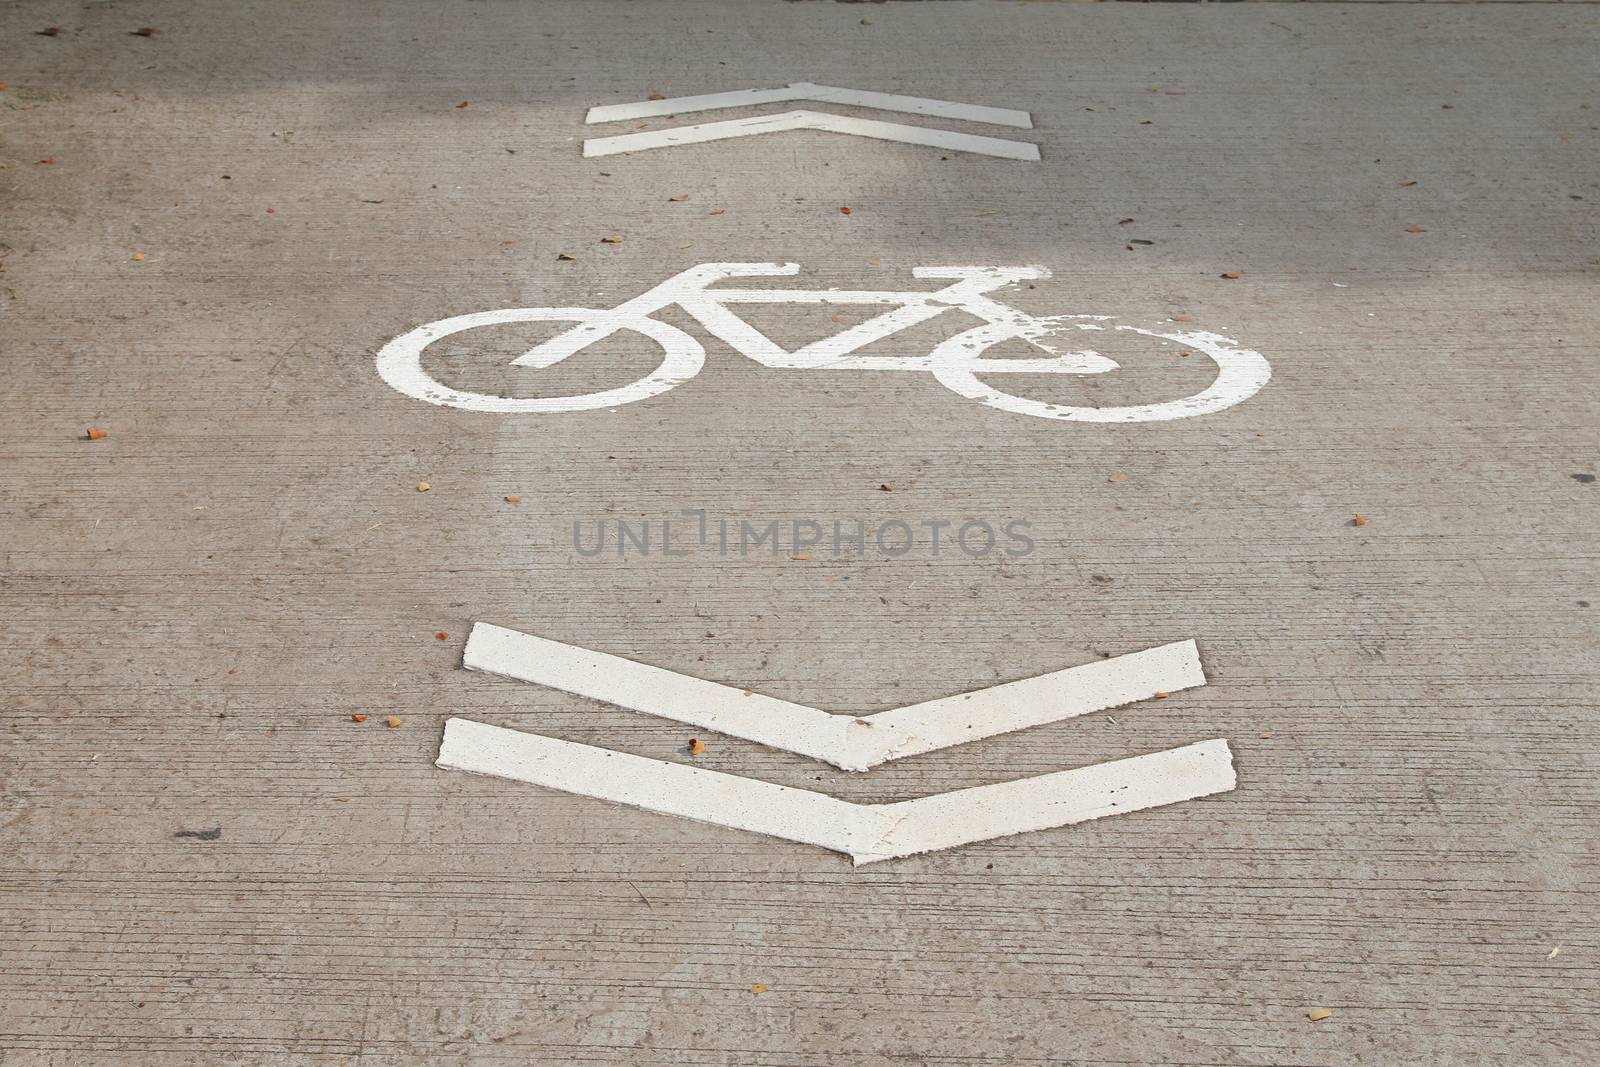 Bicycle Sign on the road